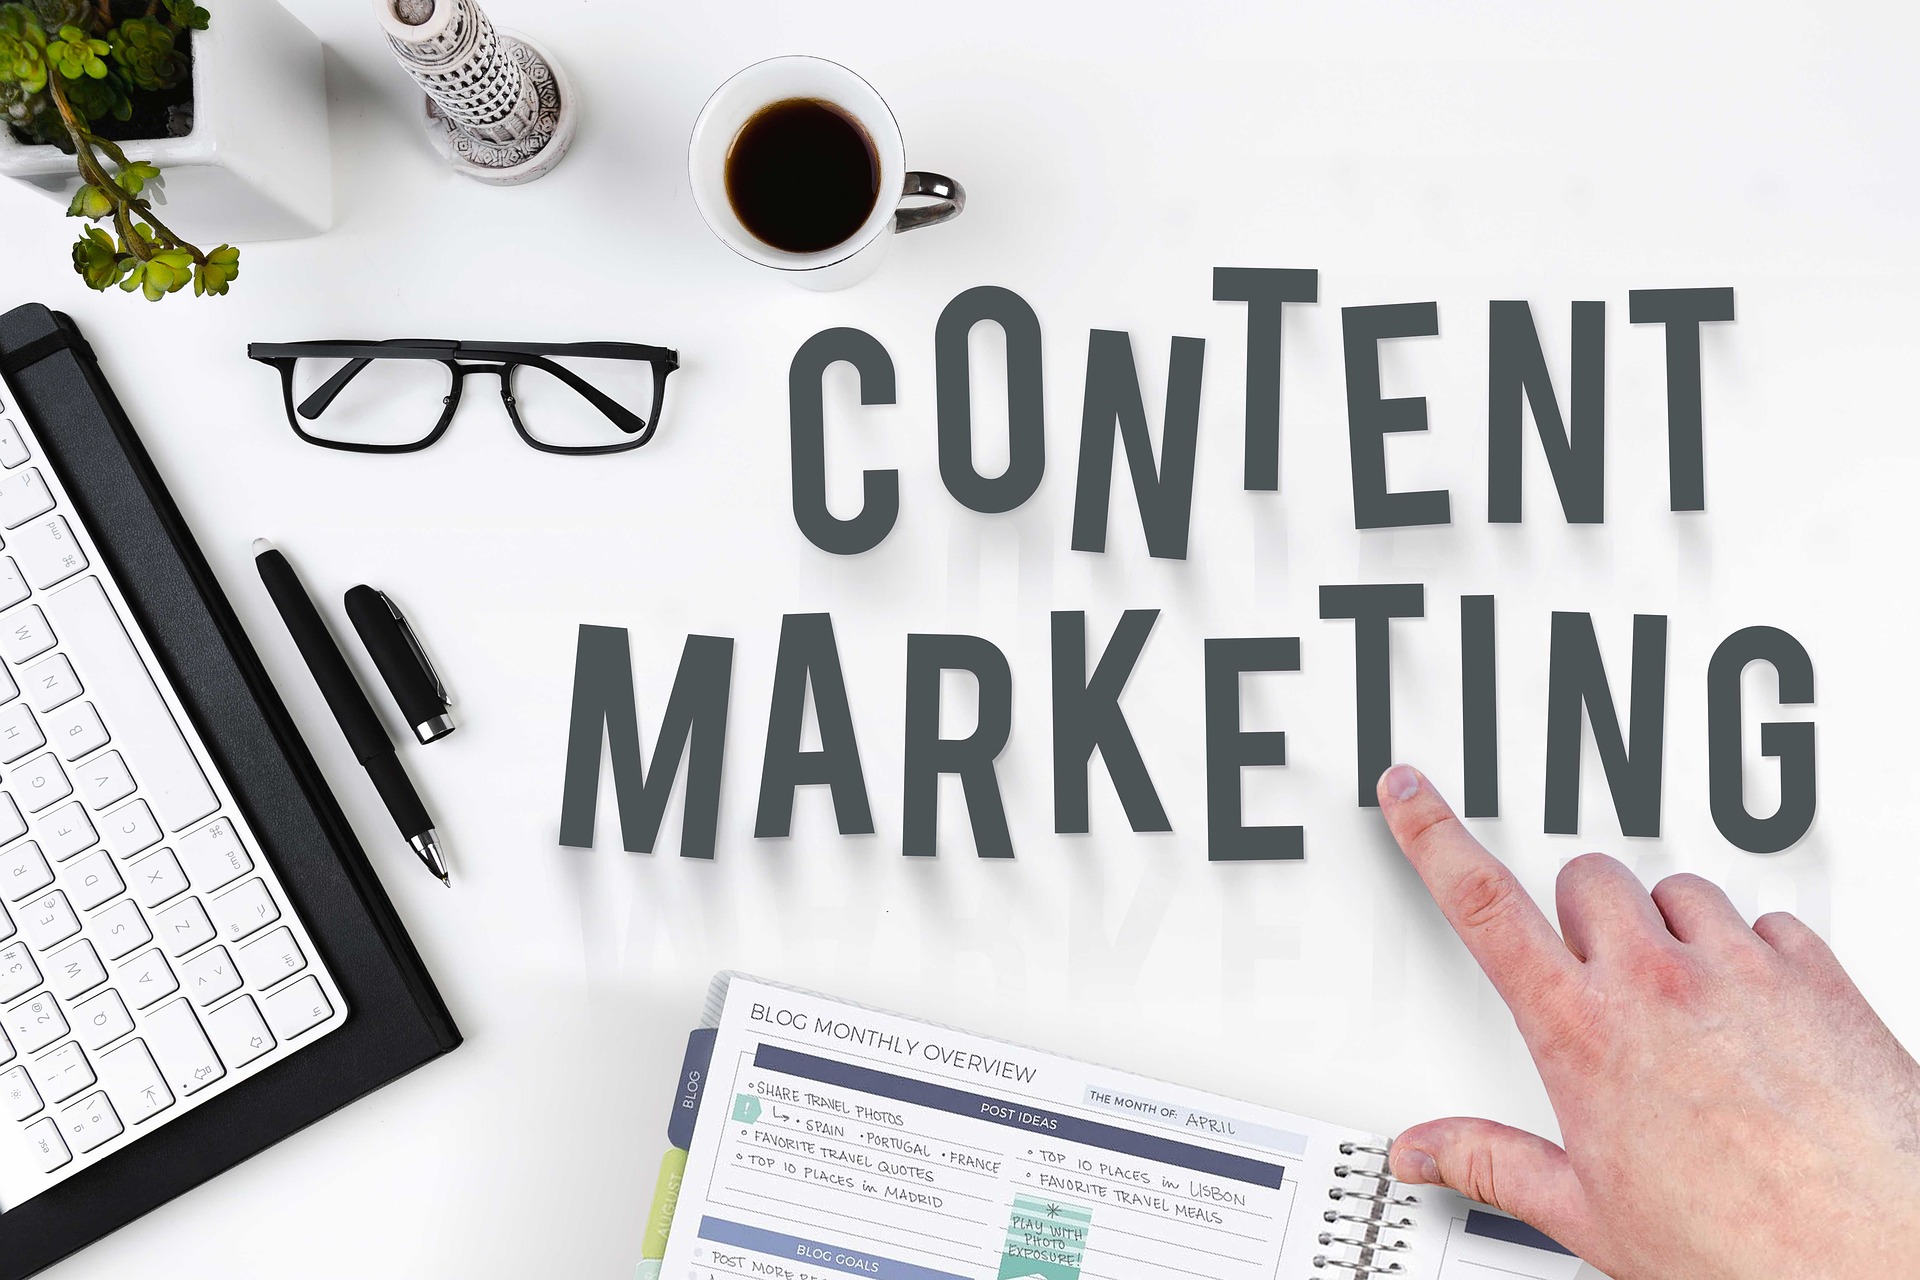 How to Become a Content Marketer